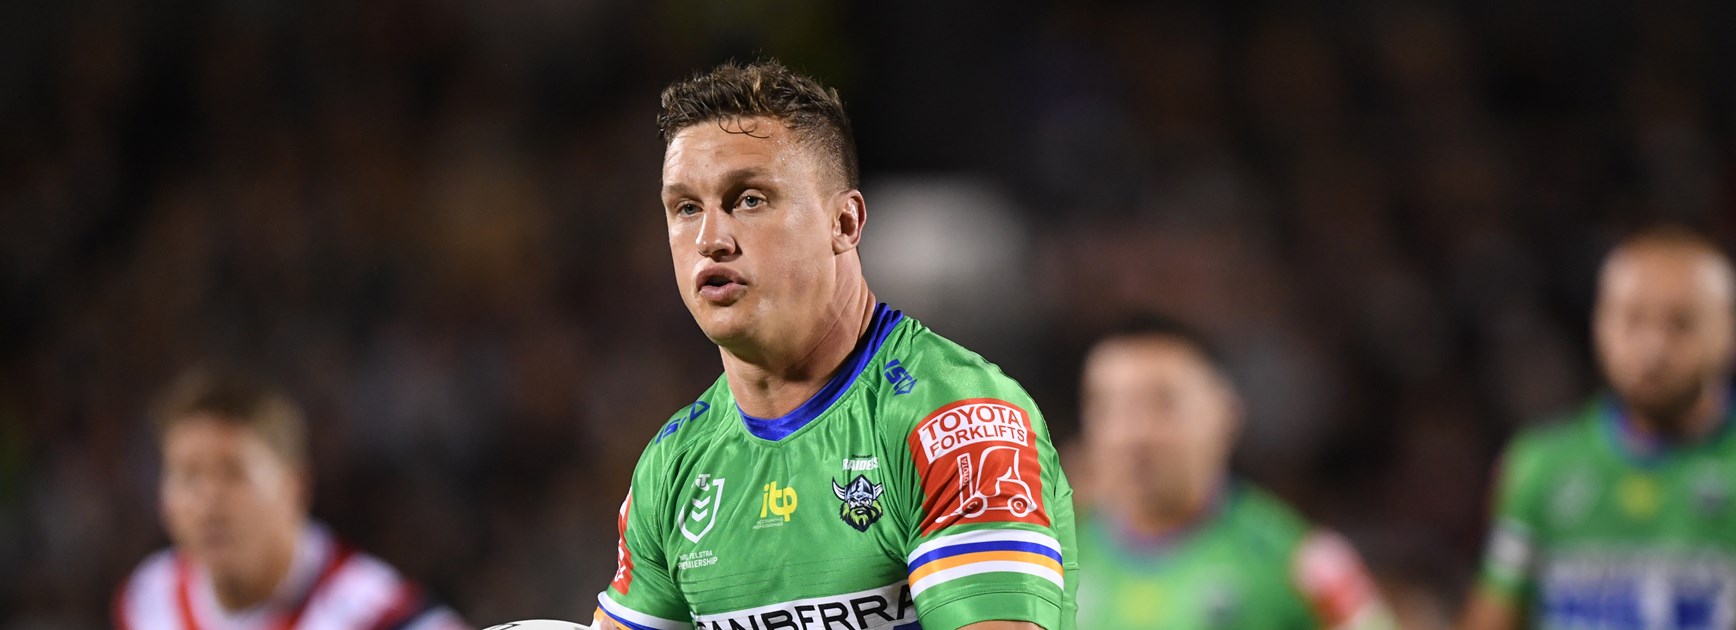 Raiders confirm 2022 Trial Matches